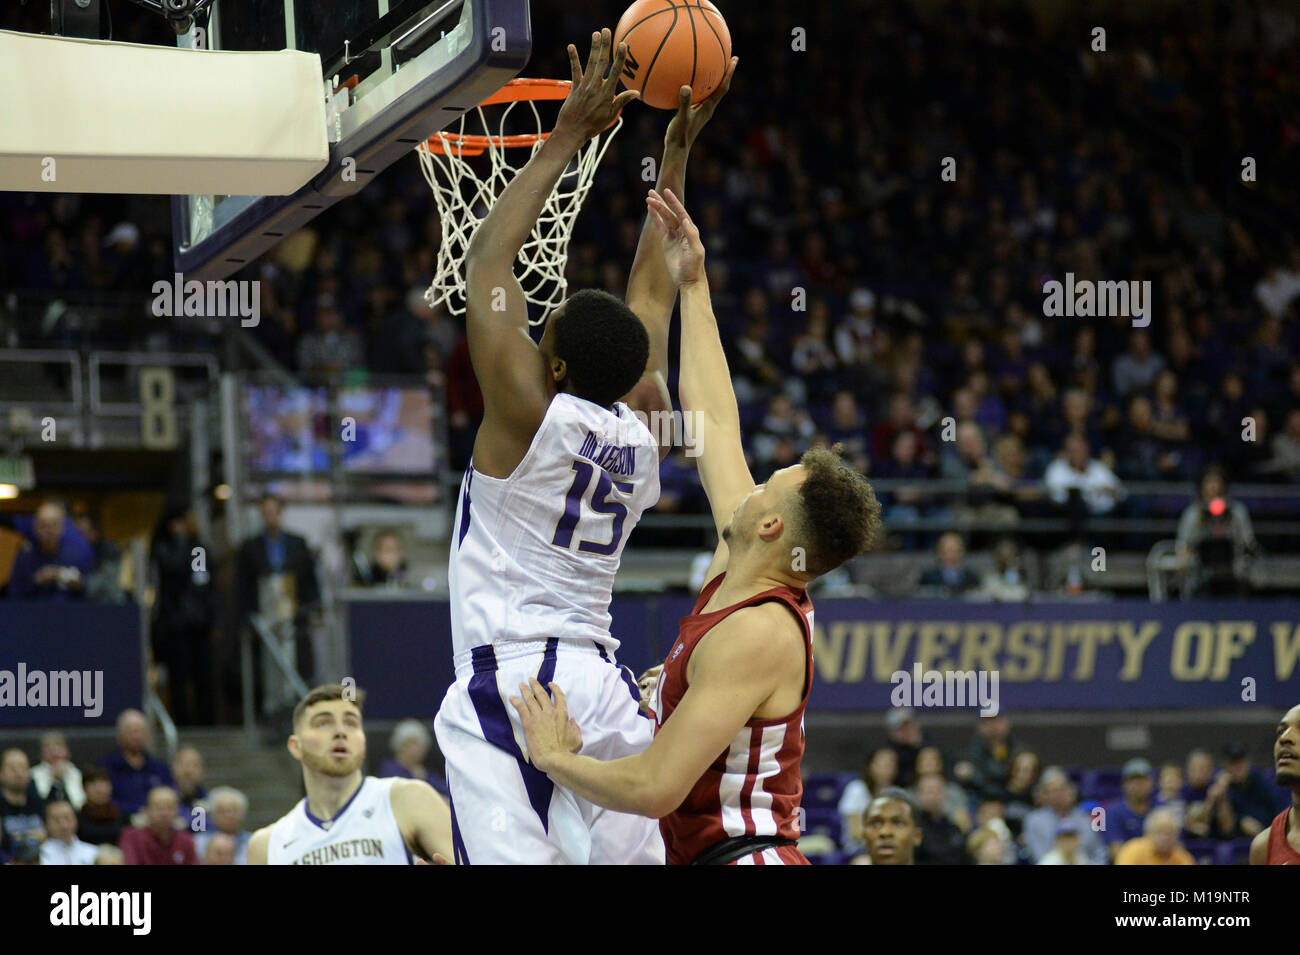 Seattle, WA, USA. 28th Jan, 2018. UW's Noah Dickerson (15) goes up for two point during a PAC12 basketball game between the Washington Huskies and WSU Cougars. The game was played at Hec Ed Pavilion in Seattle, WA. Jeff Halstead/CSM/Alamy Live News Stock Photo